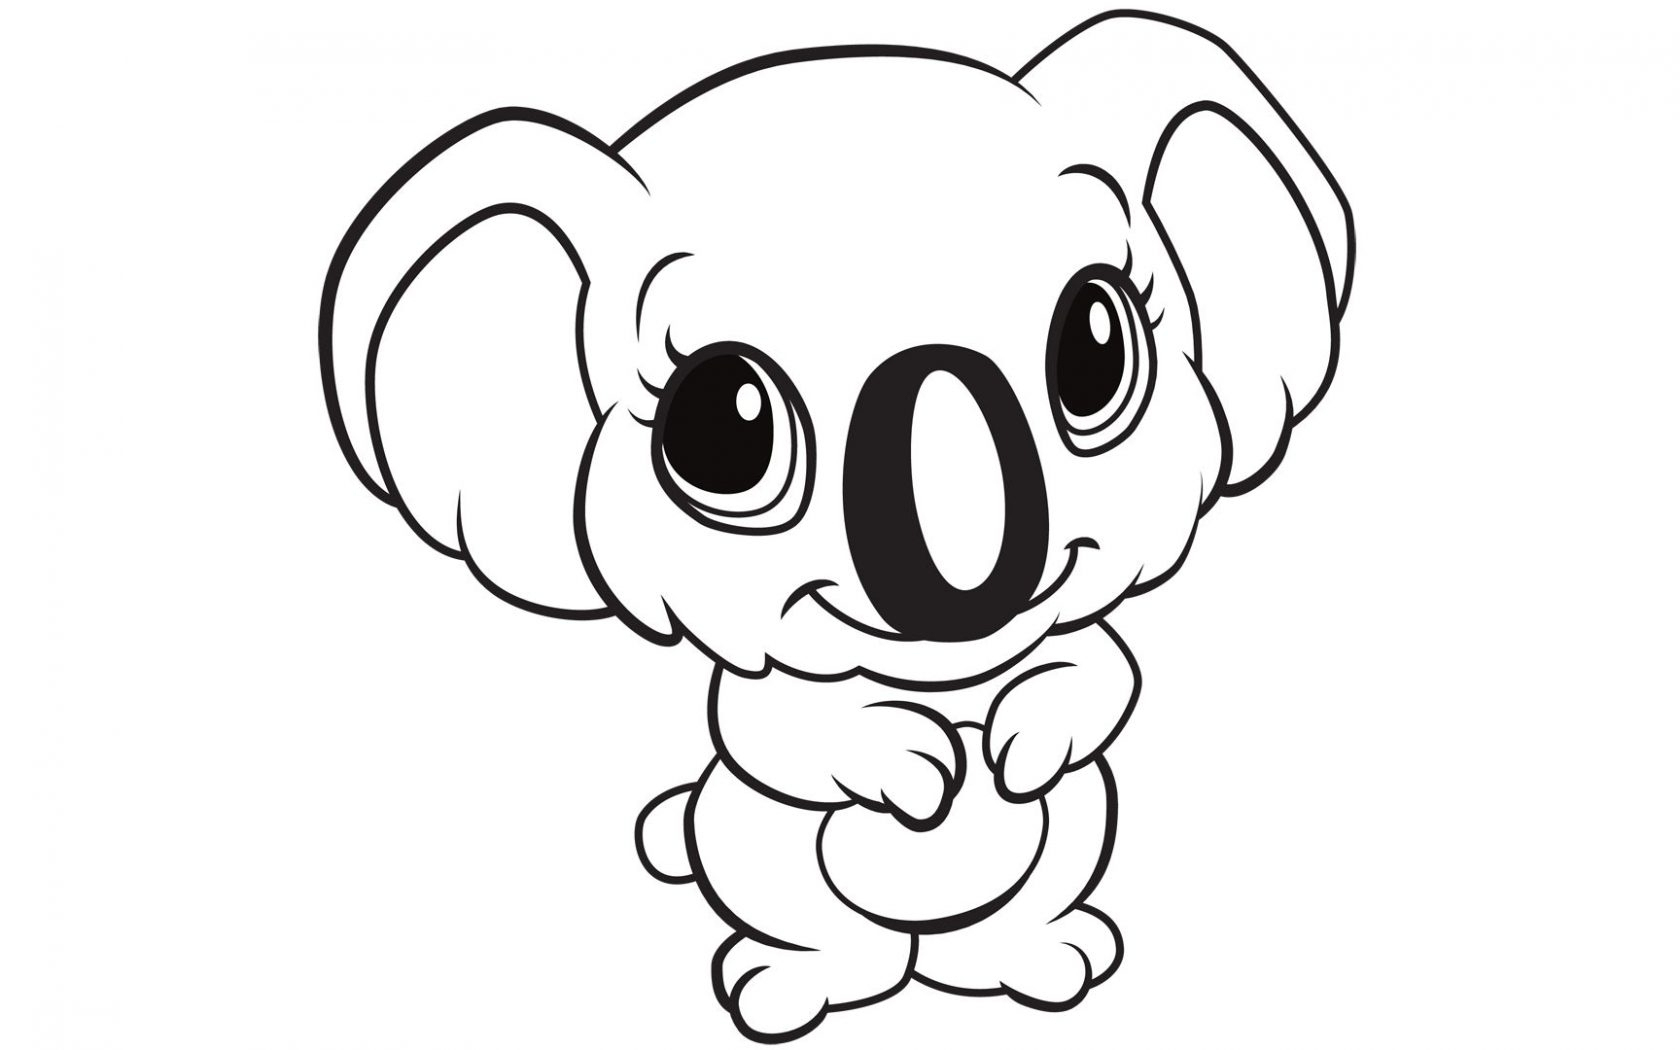 Coloring Pages ~ Coloringges Baby Animal For Kids Animals With Cute - Free Printable Pictures Of Baby Animals